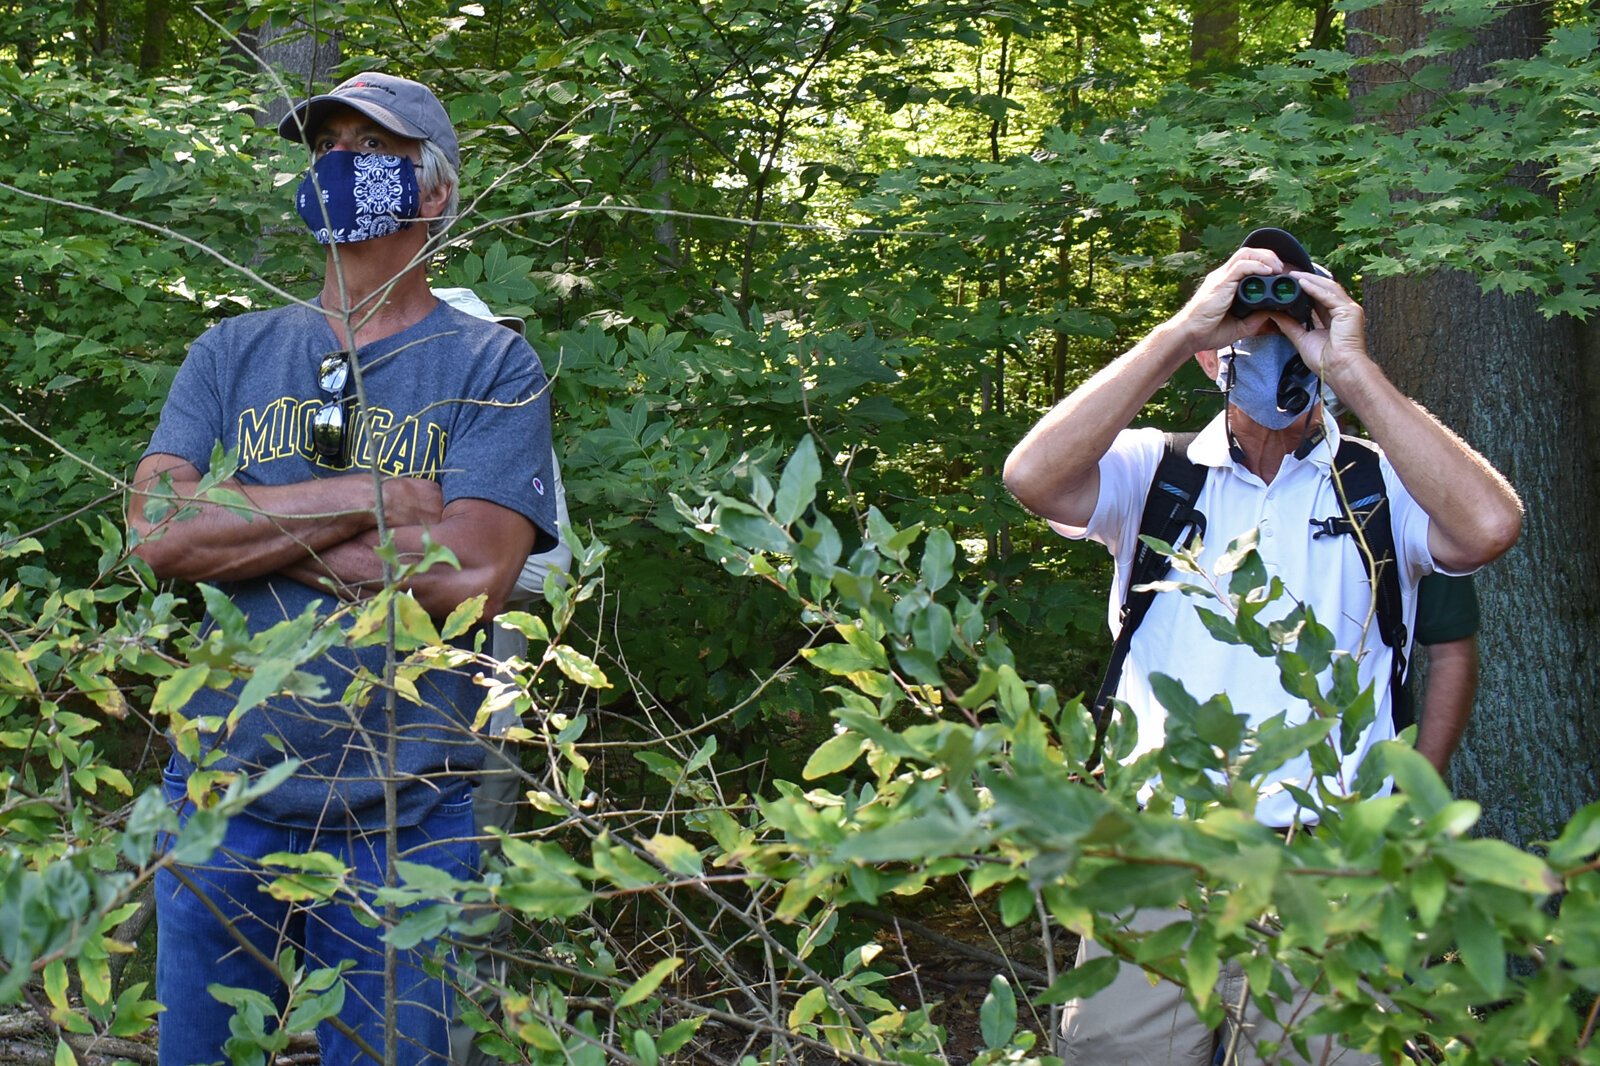 Birdwatchers have a lot to see with more than 60 bird species have been spotted in the preserve.